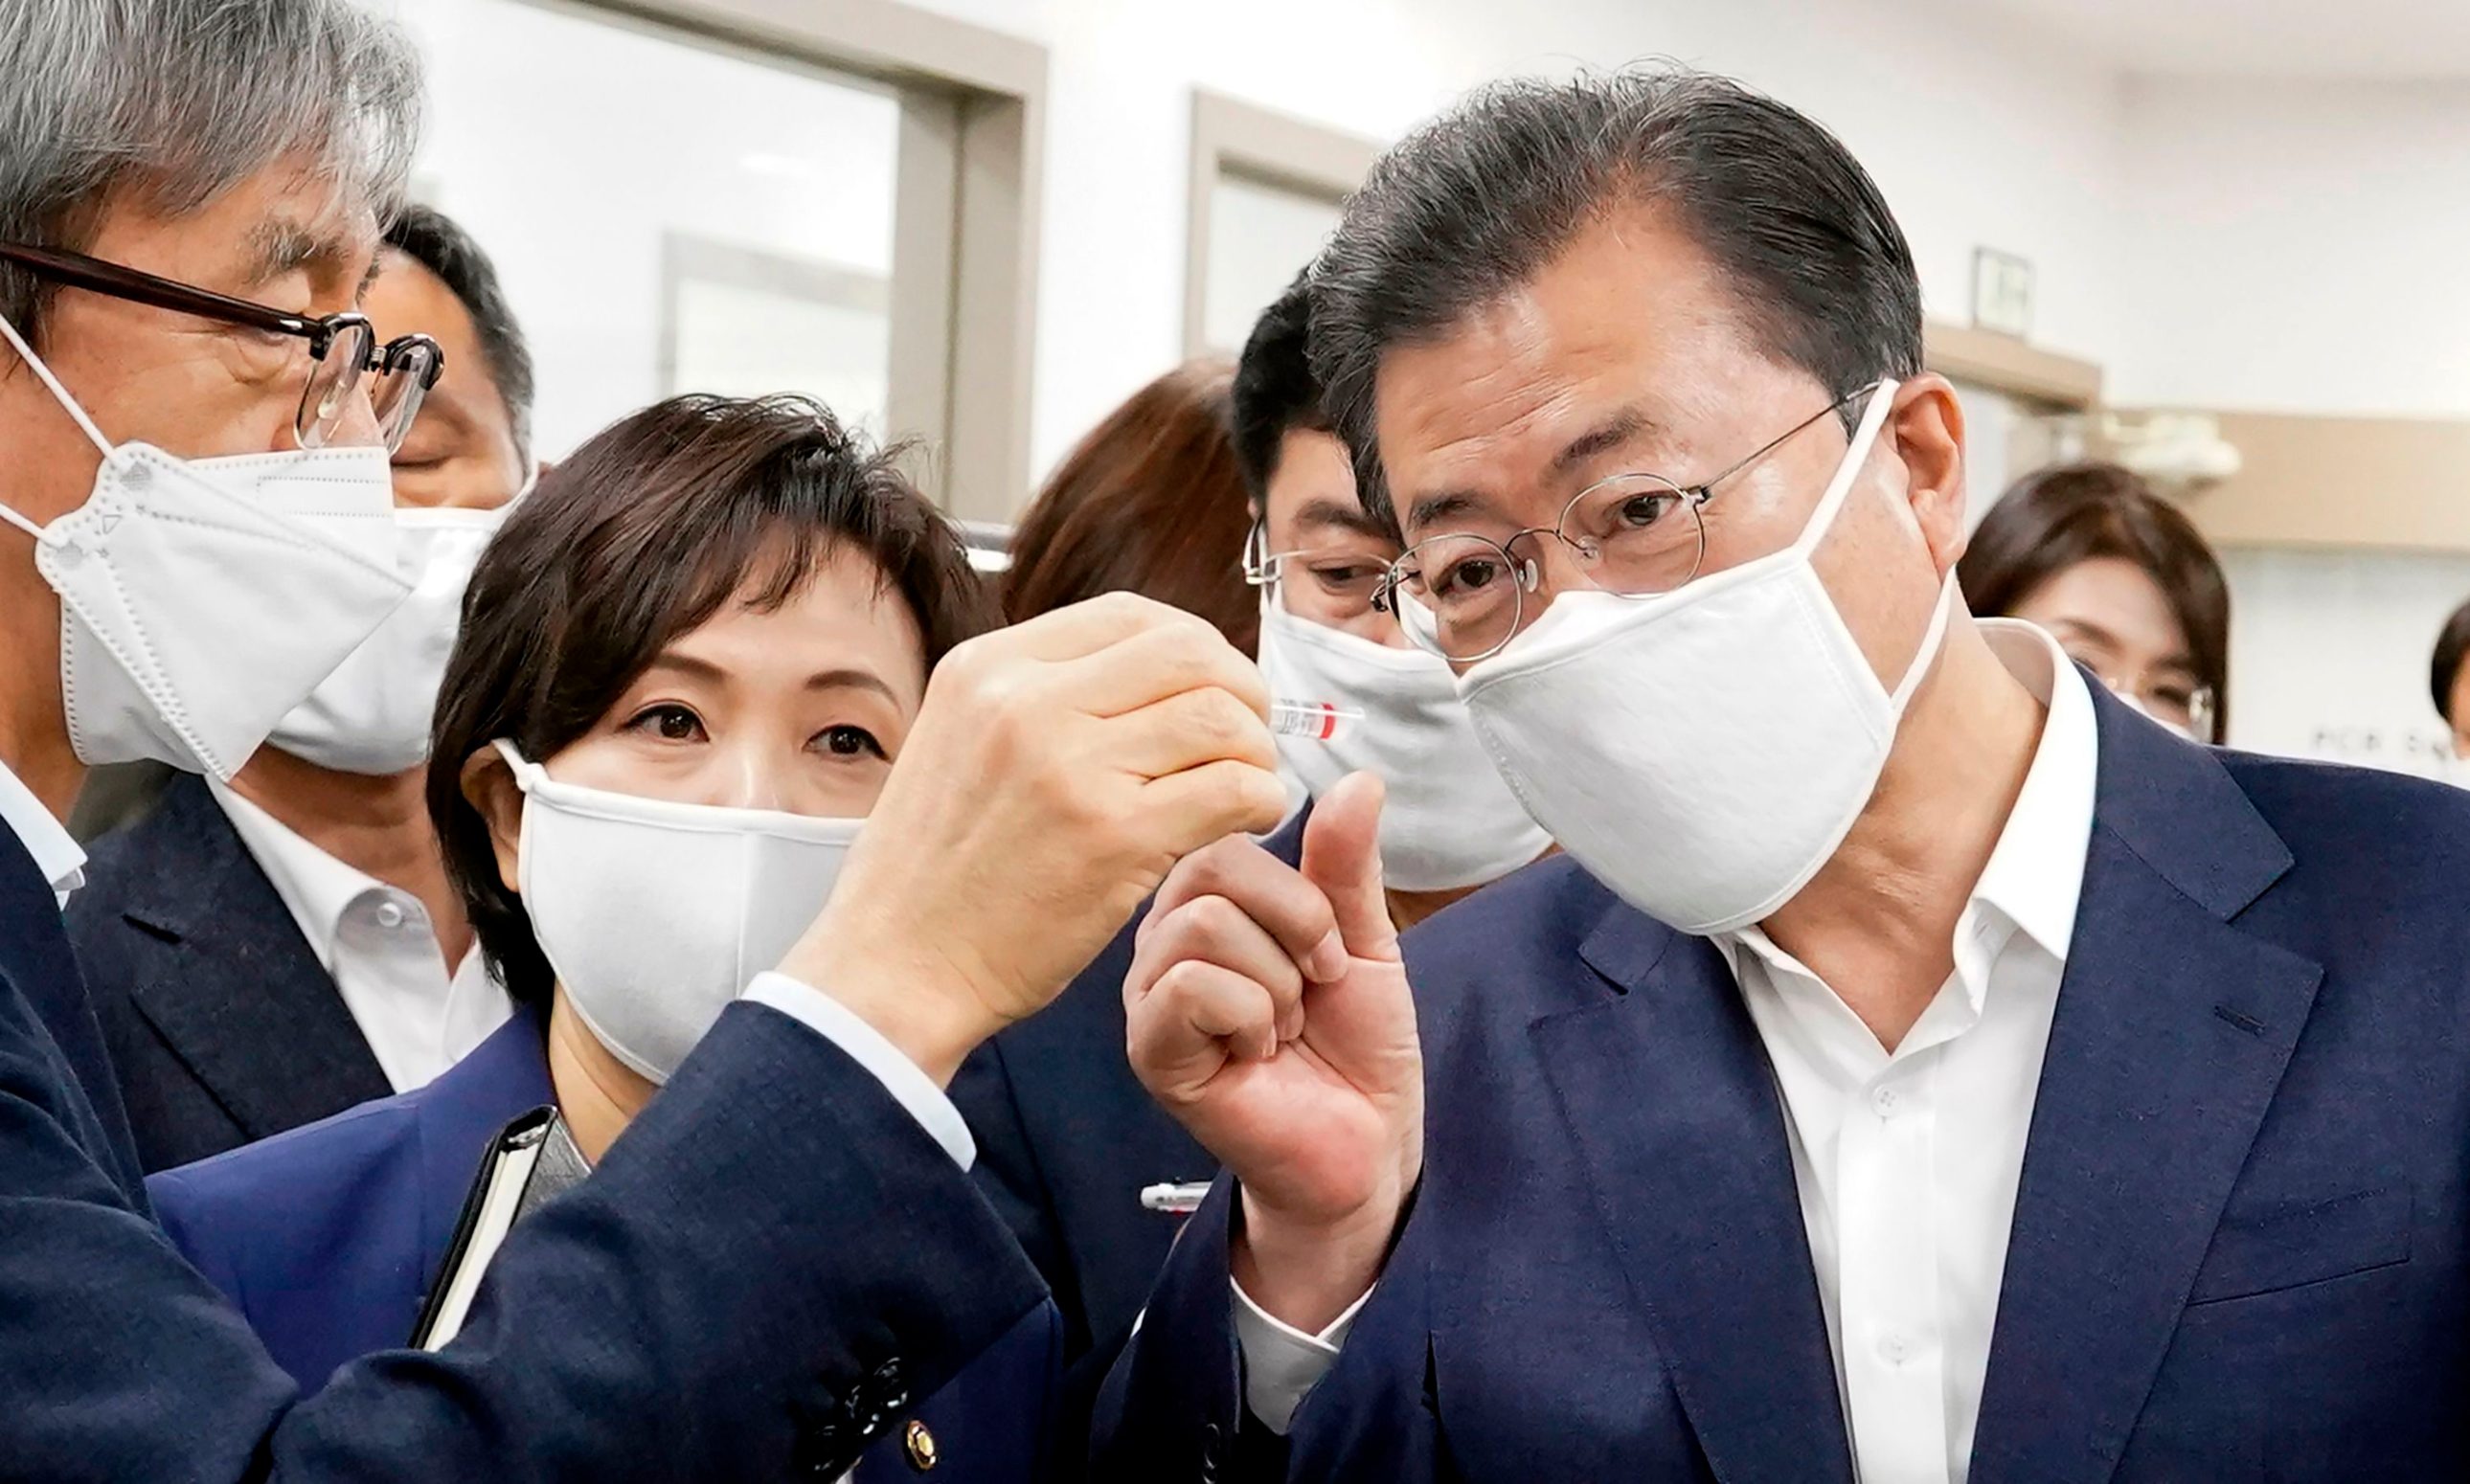 South Korean President Moon Jae-in (R) visits a Seegene research facility, a Seoul-based developer of COVID-19 diagnostic solutions, in Seoul on March 25, 2020. - At one point South Korea was the country hardest-hit by the virus outside China, but widespread testing and quarantine efforts have seen new cases fall below 100 a day. (Photo by - / YONHAP / AFP) / - South Korea OUT / REPUBLIC OF KOREA OUT  NO ARCHIVES  RESTRICTED TO SUBSCRIPTION USE